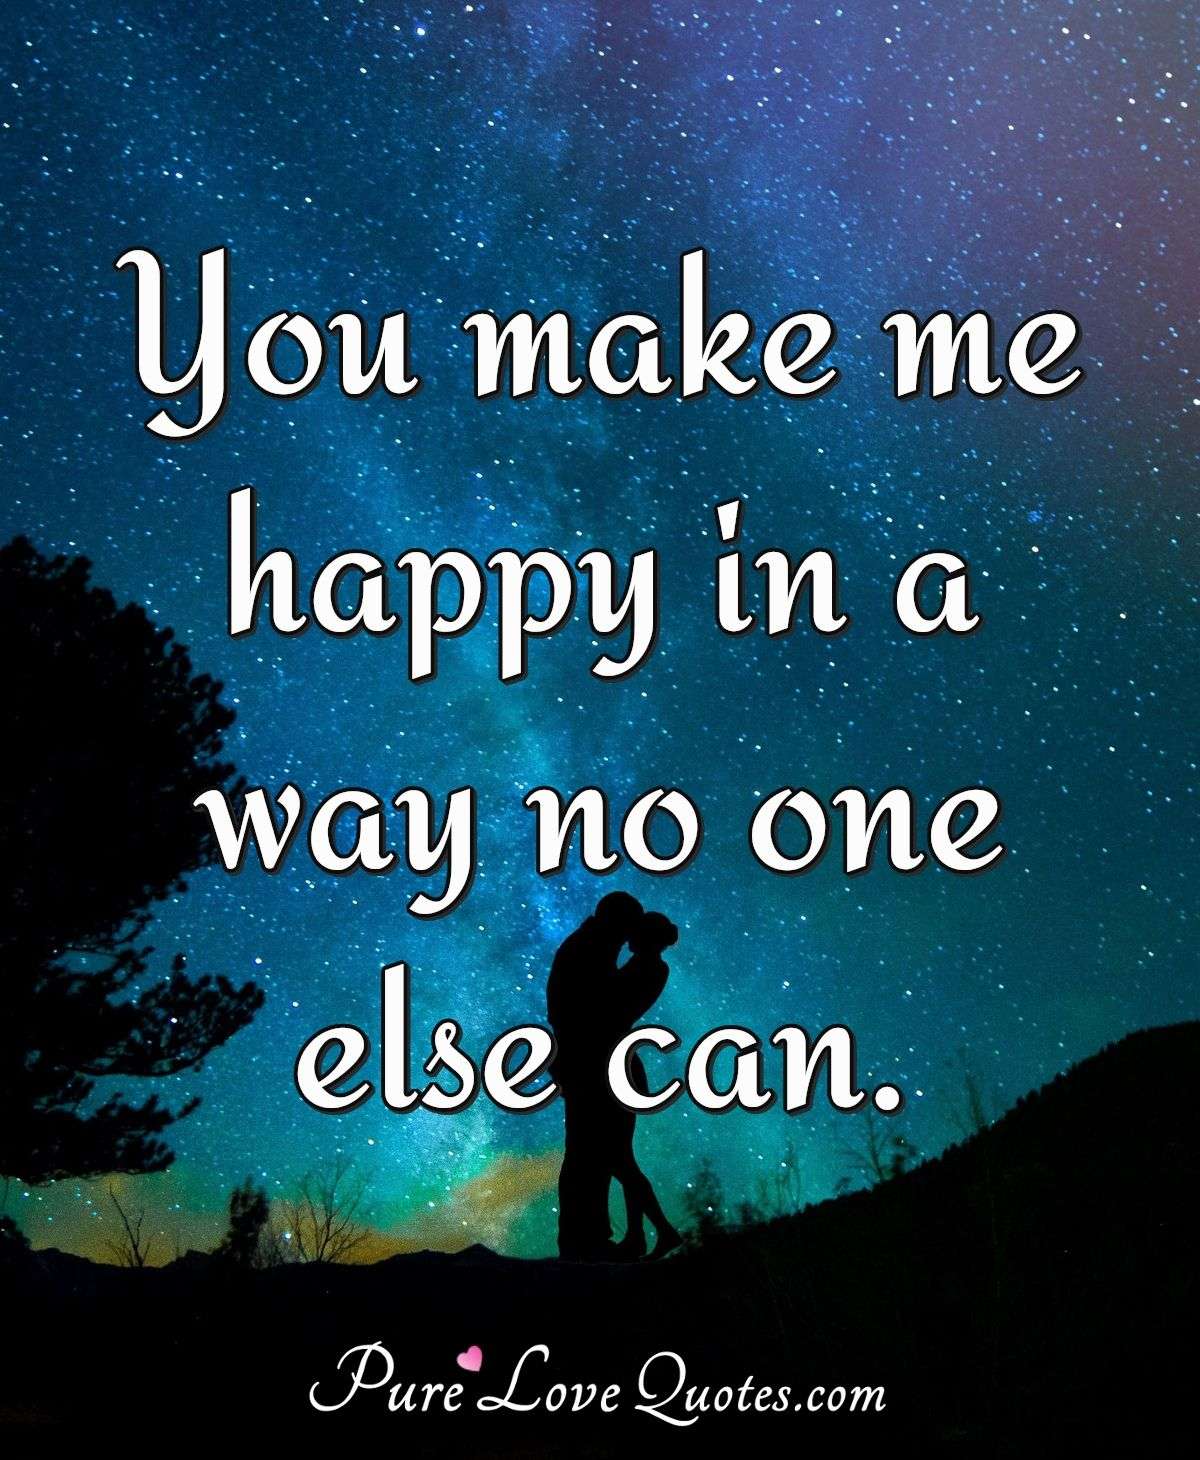 You Make Me Smile Quotes Love